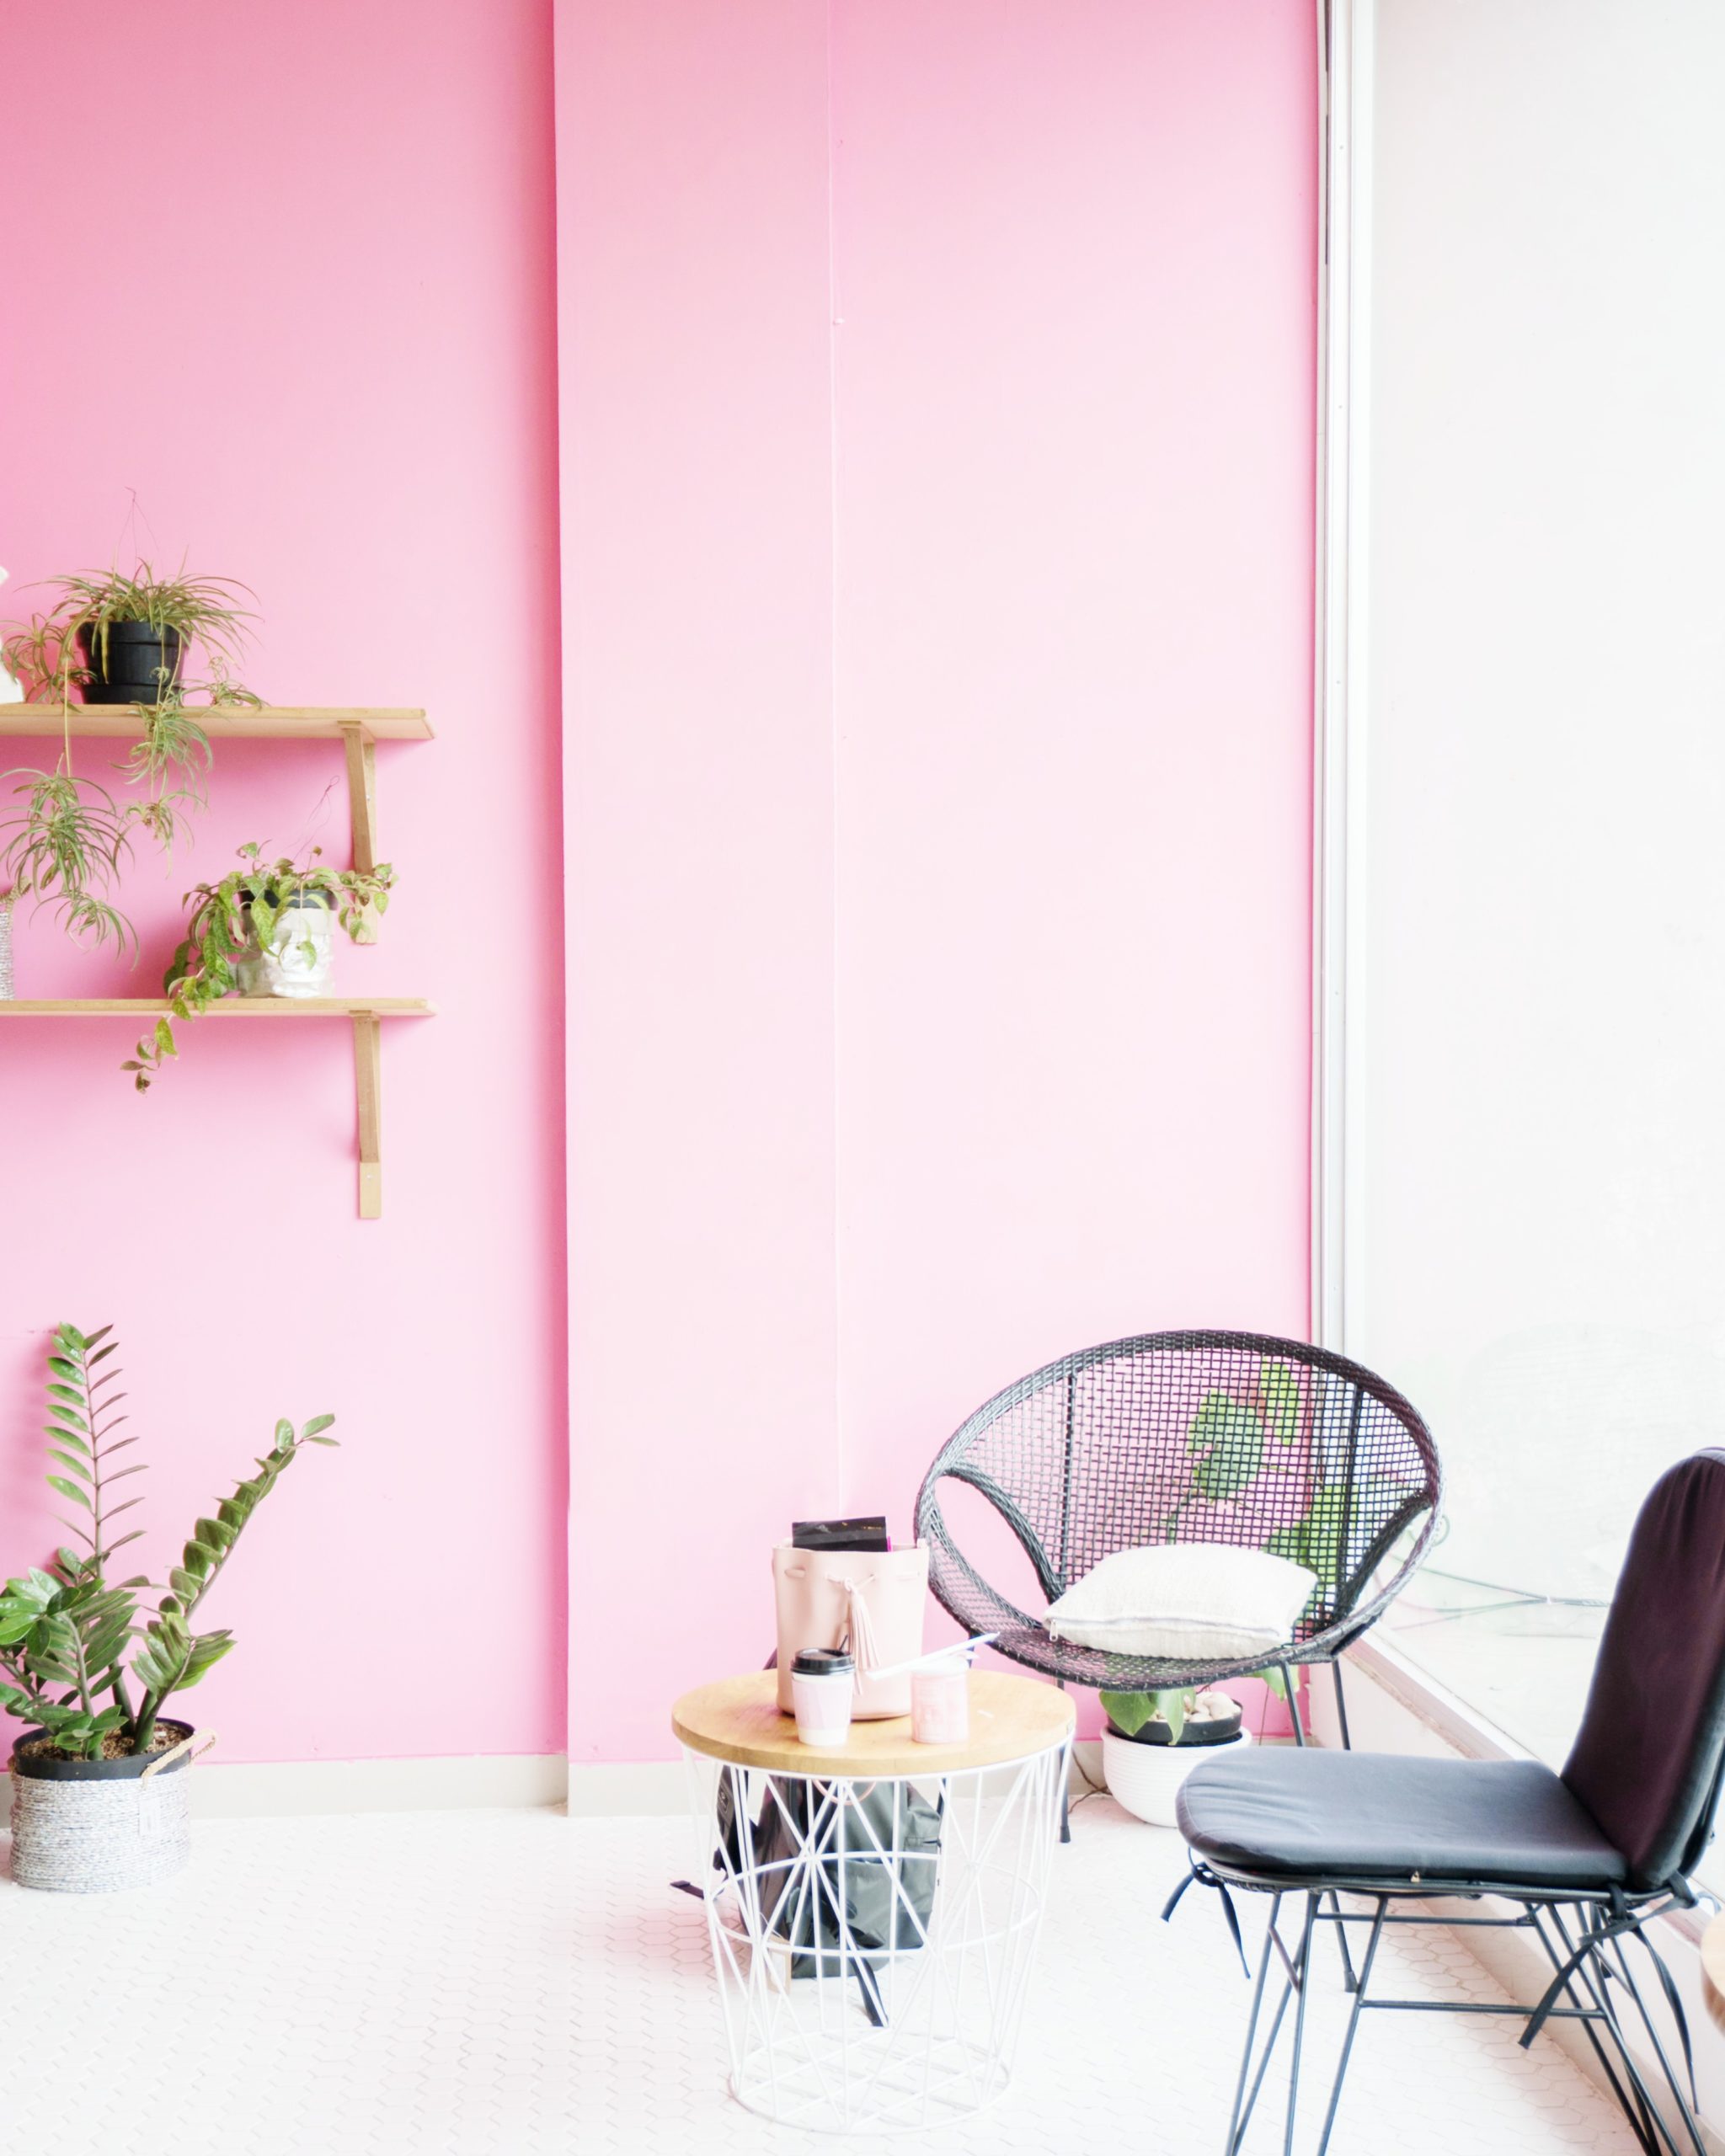 <img src="pink.jpg" alt="pink stylish home office with chairs"/> 